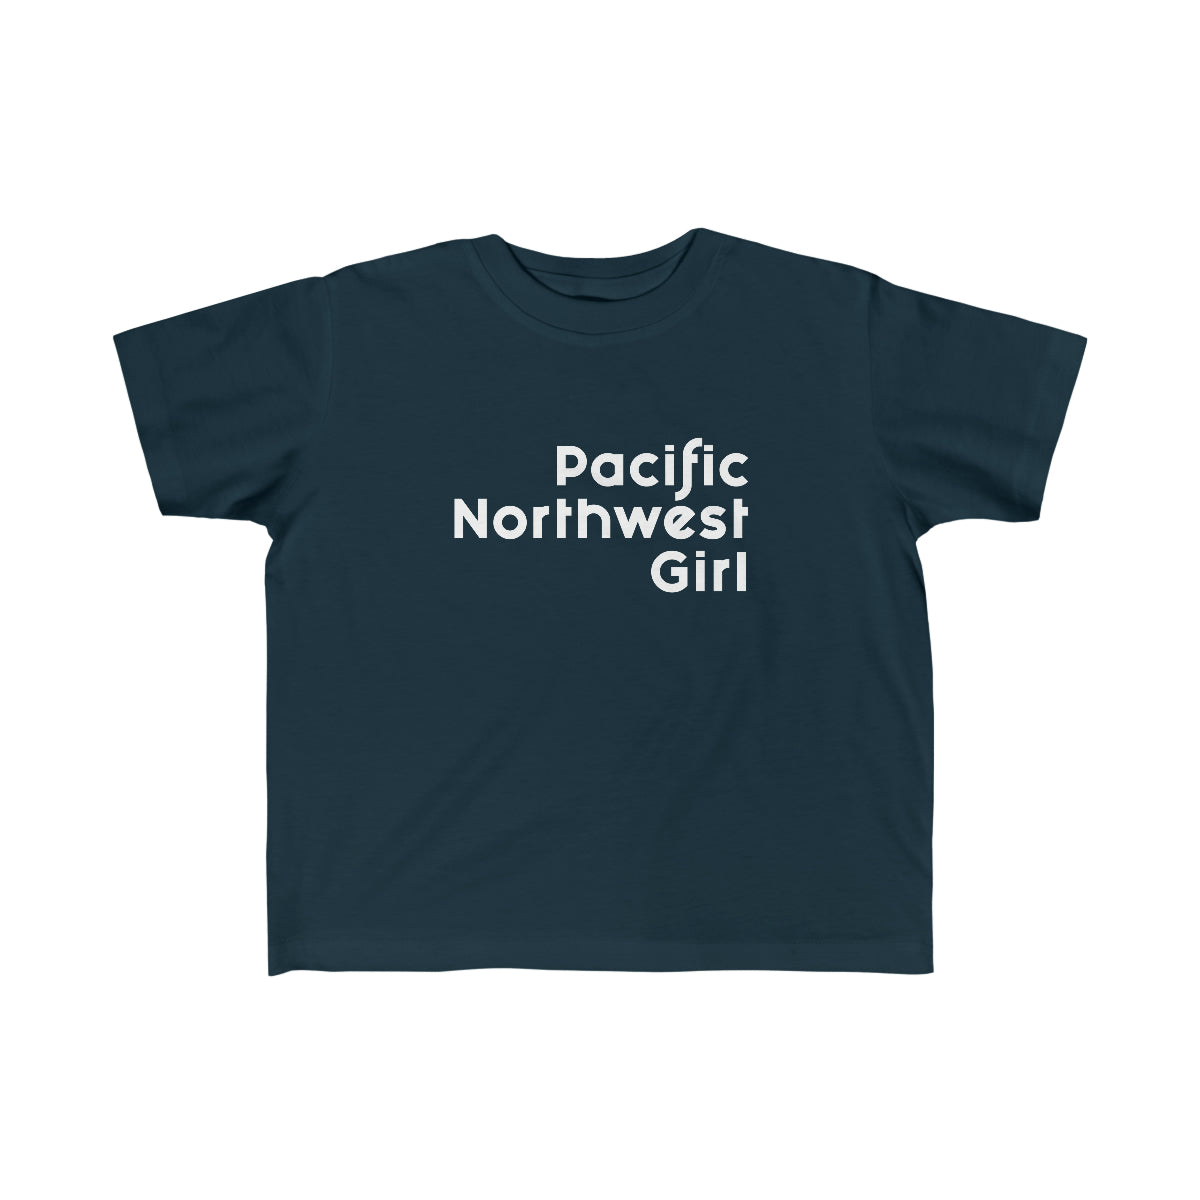 Pacific Northwest Girl Toddler Tee Navy / 2T - The Northwest Store